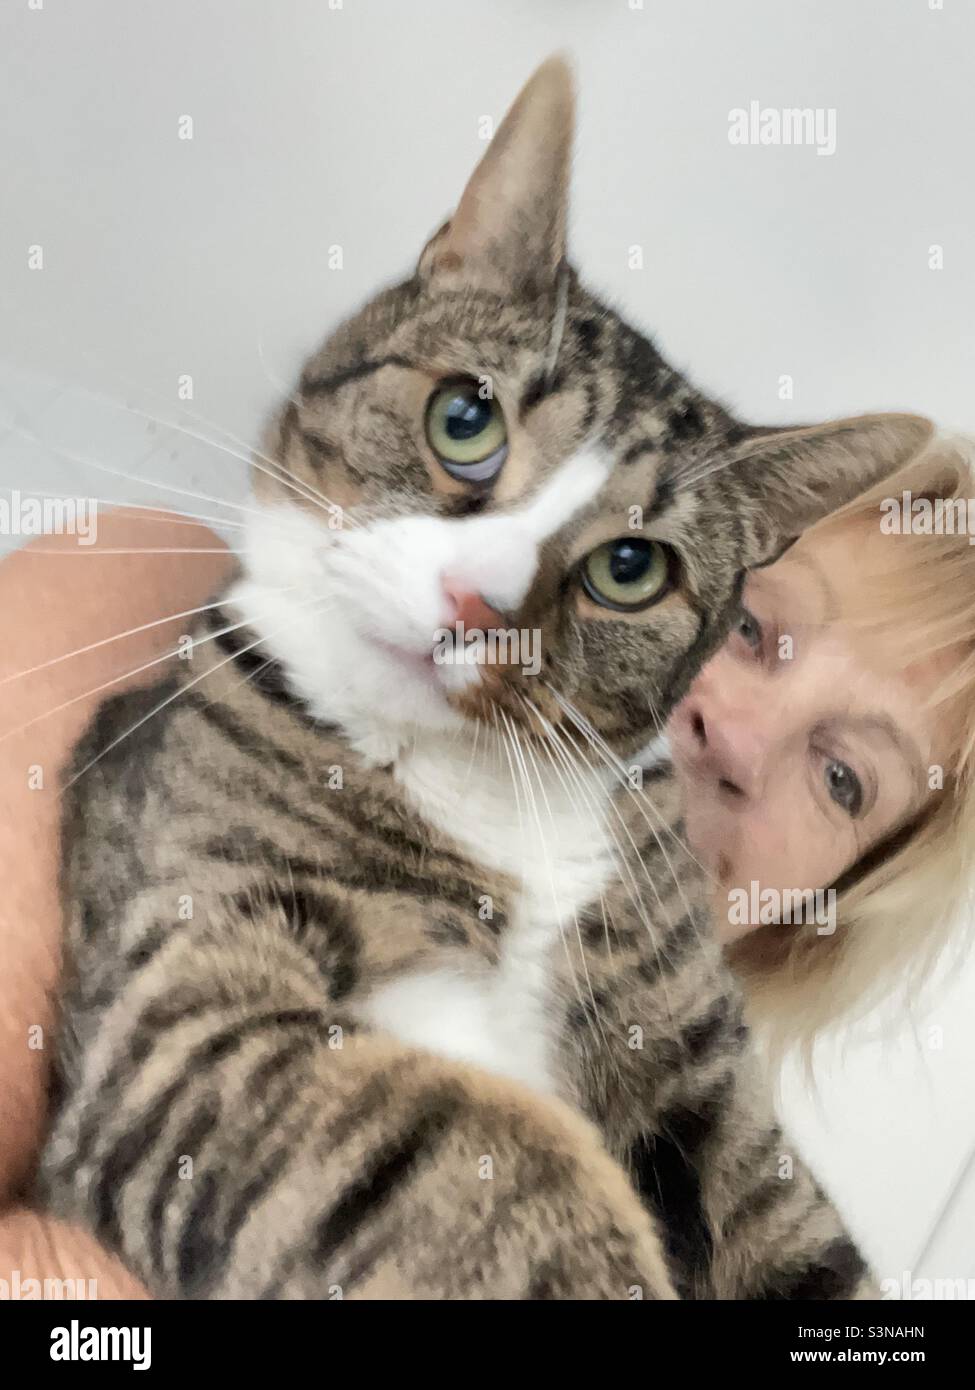 The he-cat in my arms. Stock Photo